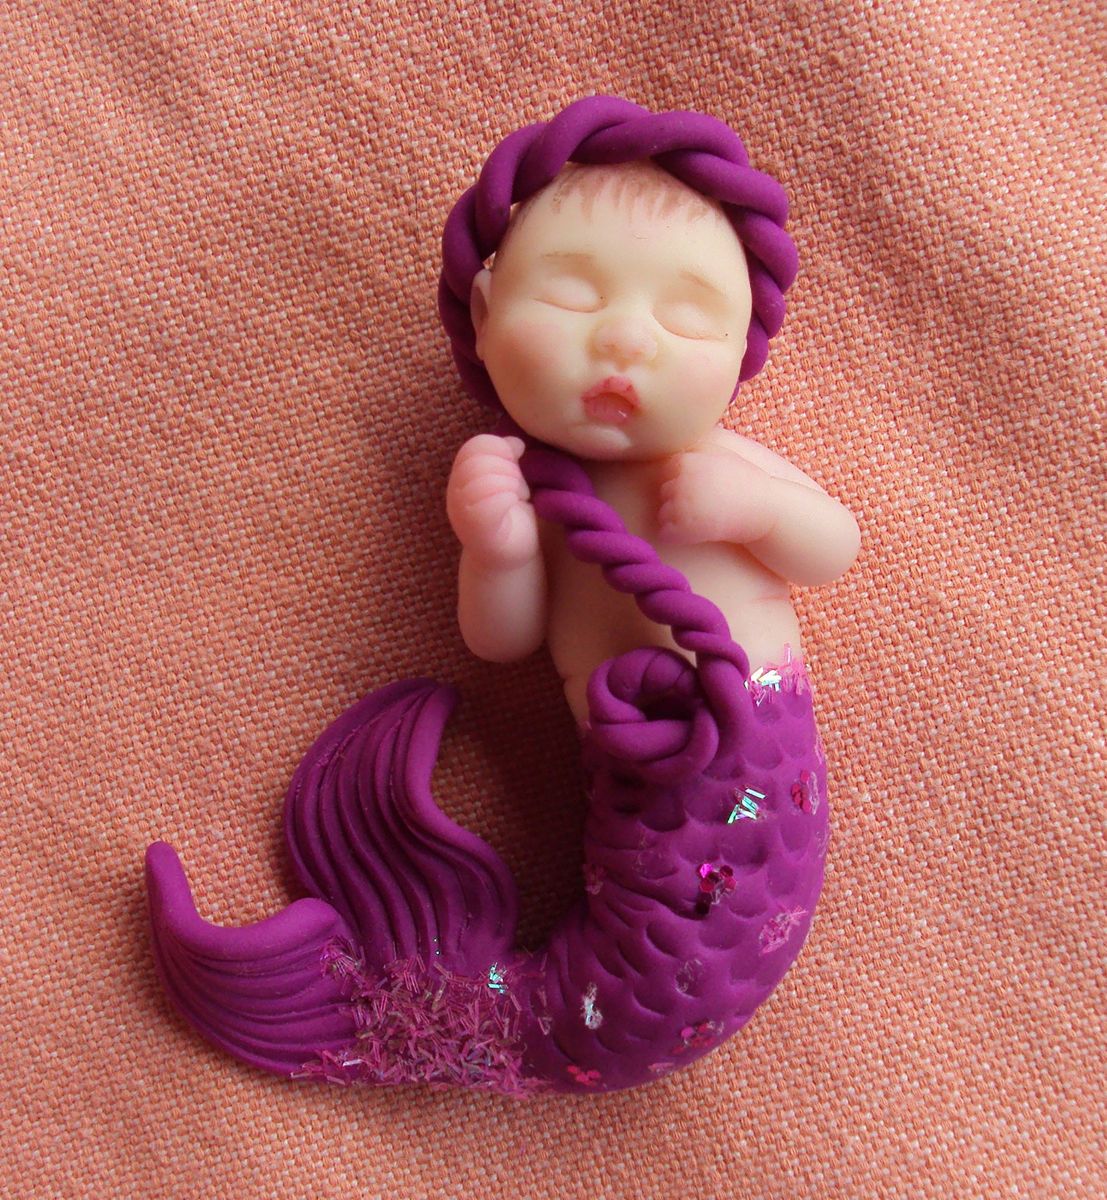   POLYMER DOLL BABY MERMAID FAIRY FAERIE HAND SCULPTED BY LIDIA ALBANESE